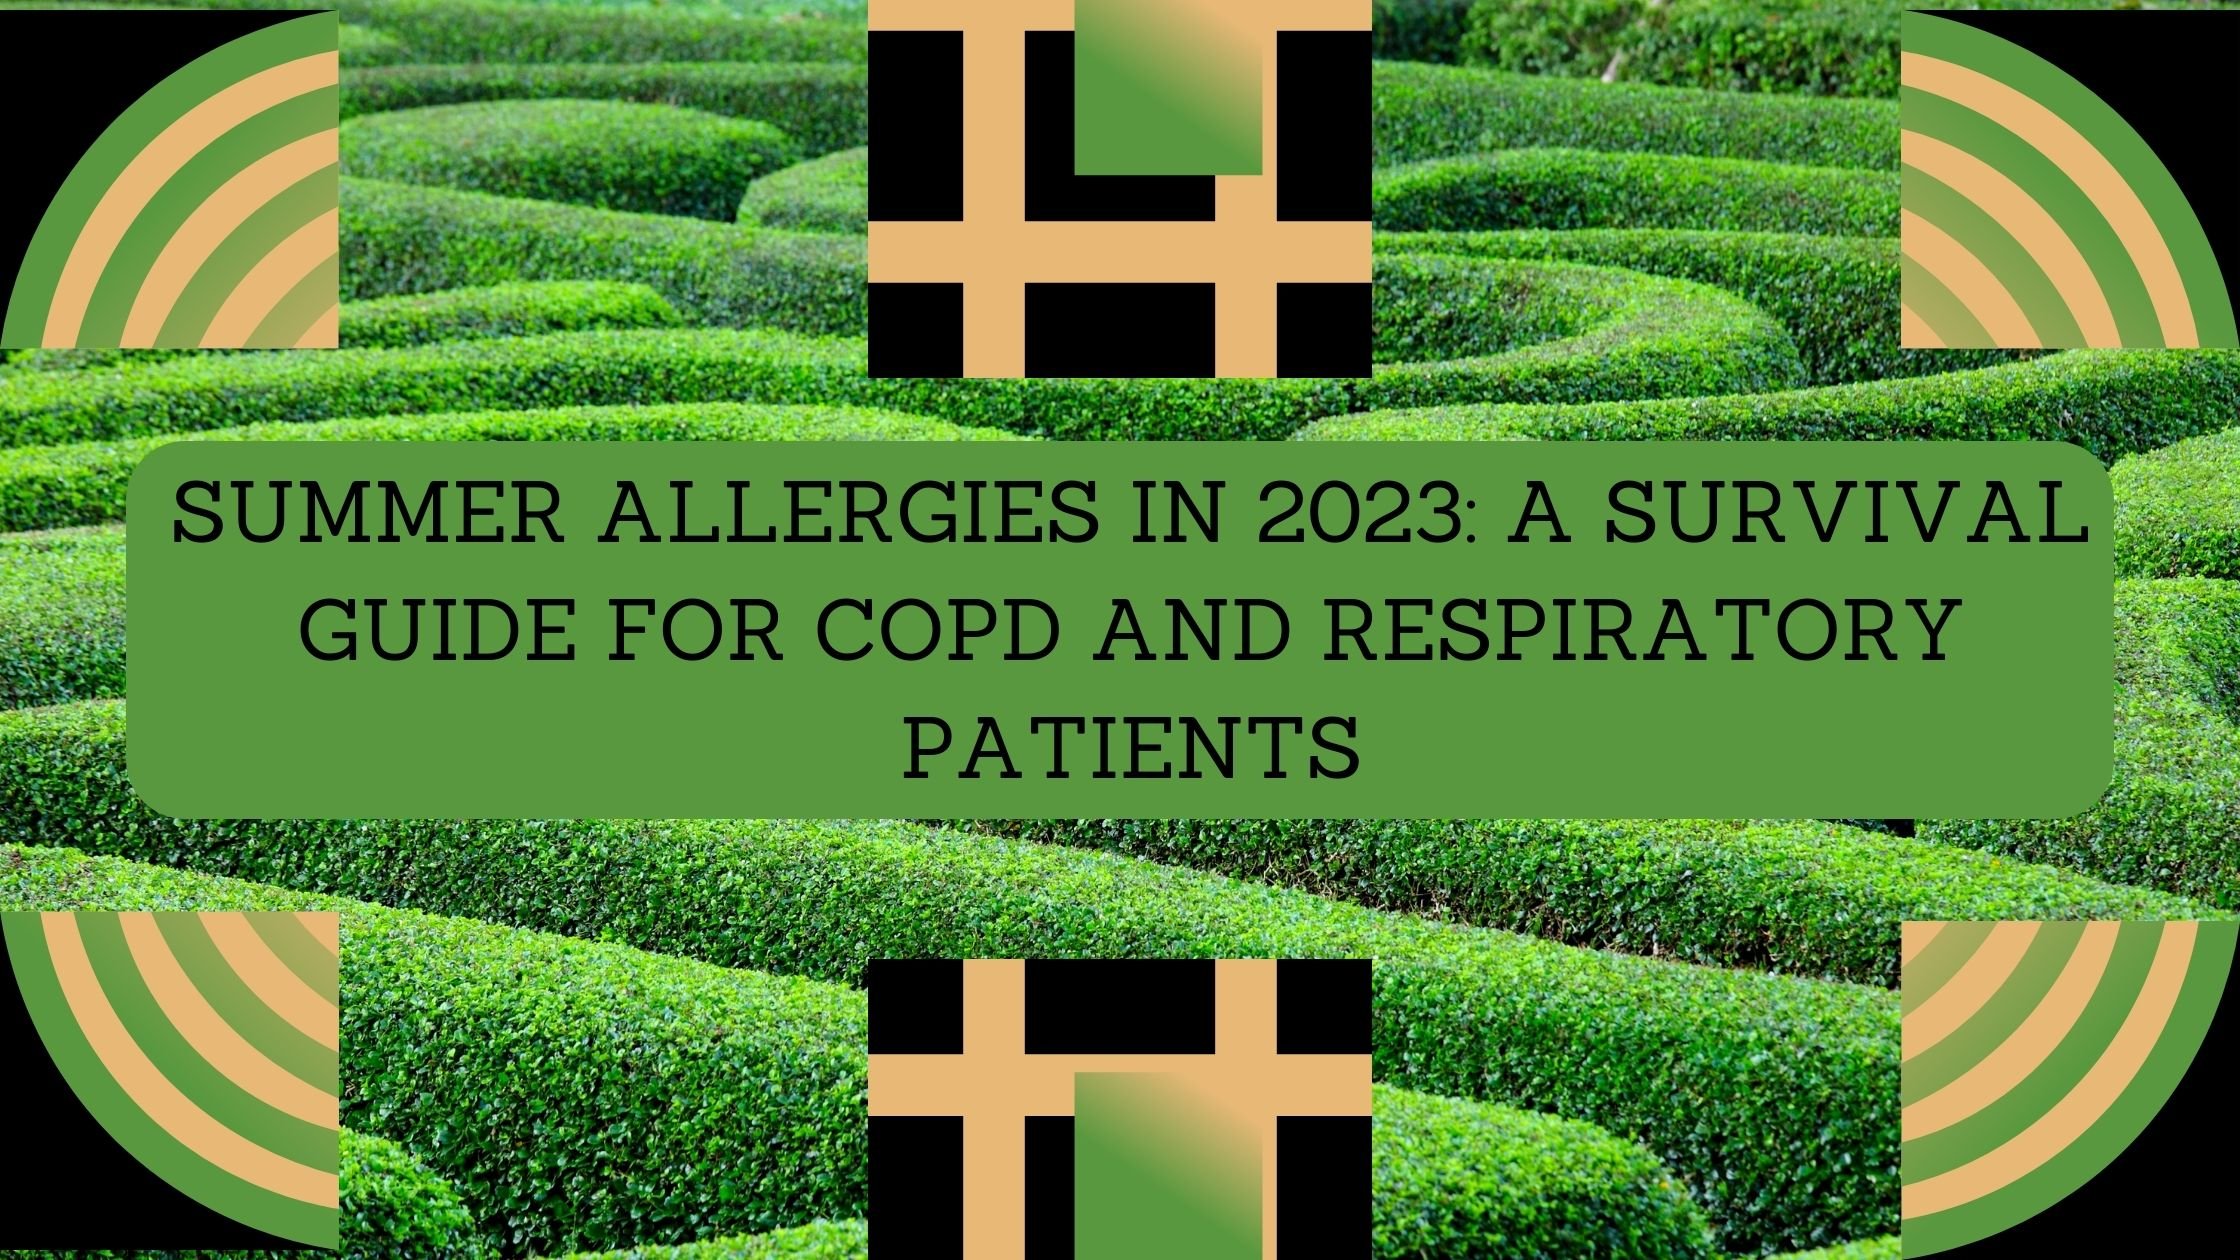 Summer Allergies in 2023 A Survival Guide for COPD and Respiratory Patients